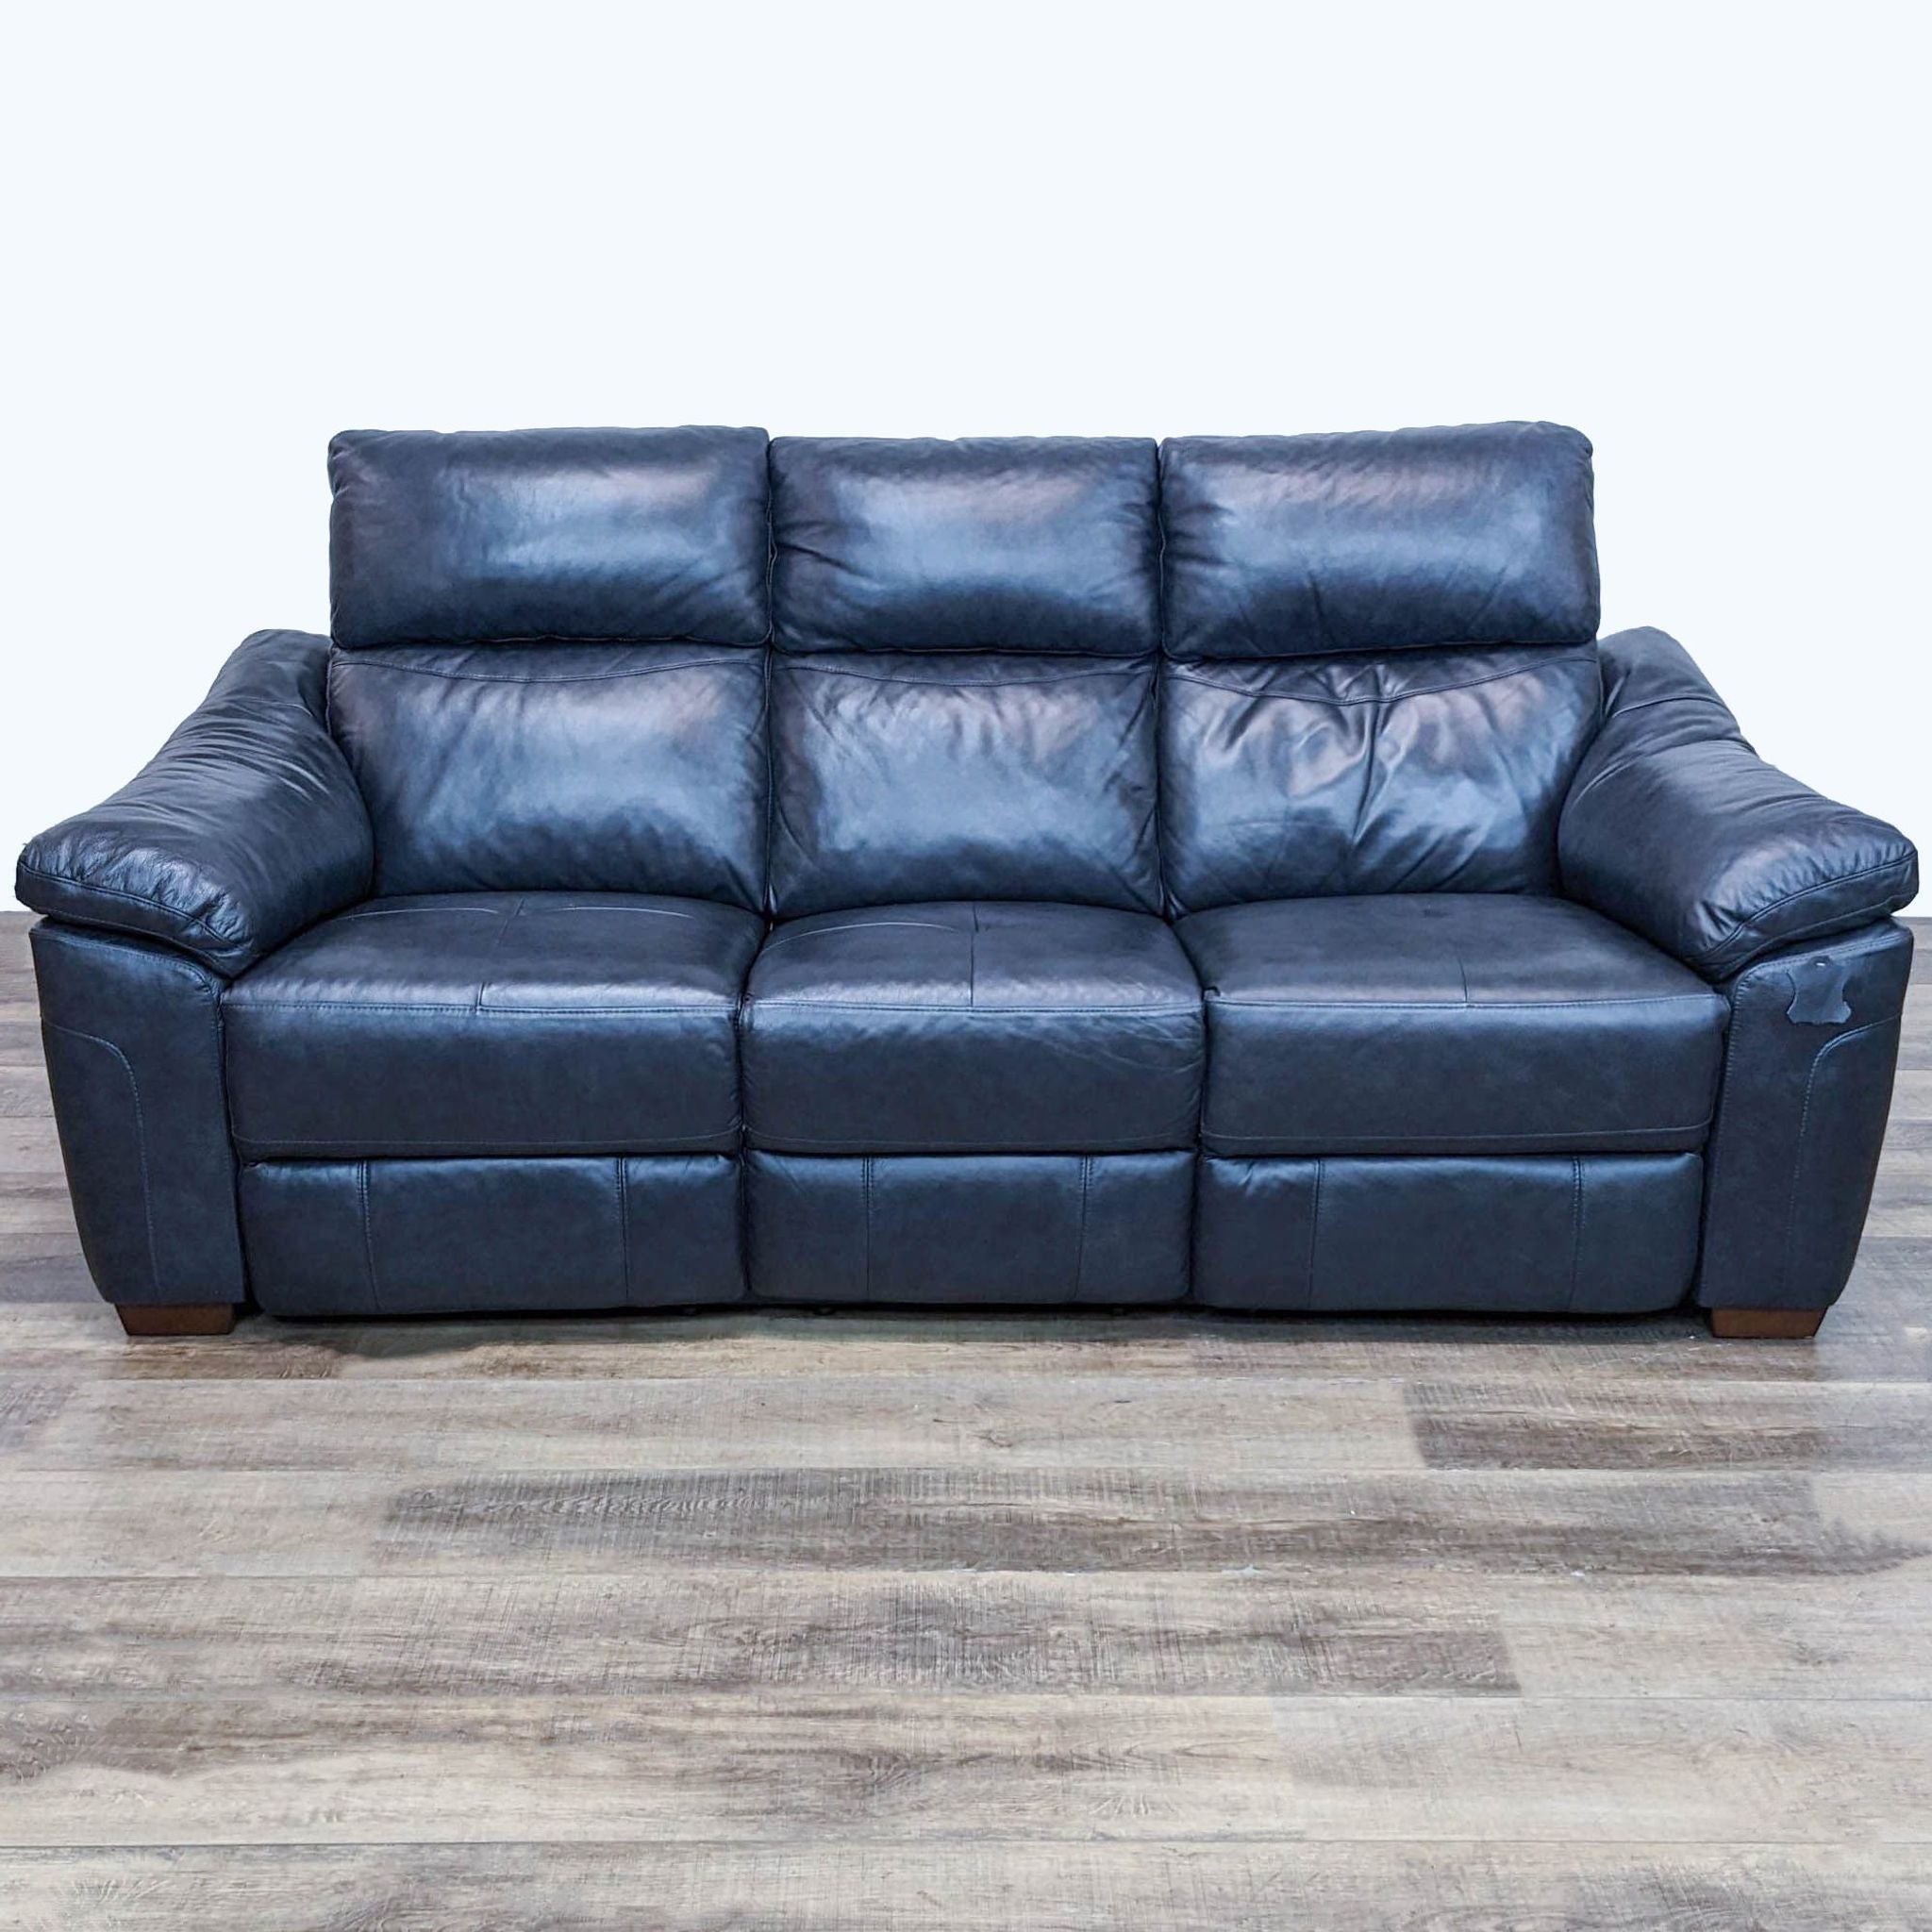 Reperch brand 3-seat sofa with high back lumbar support cushion and plush arms, presented on a wooden floor.